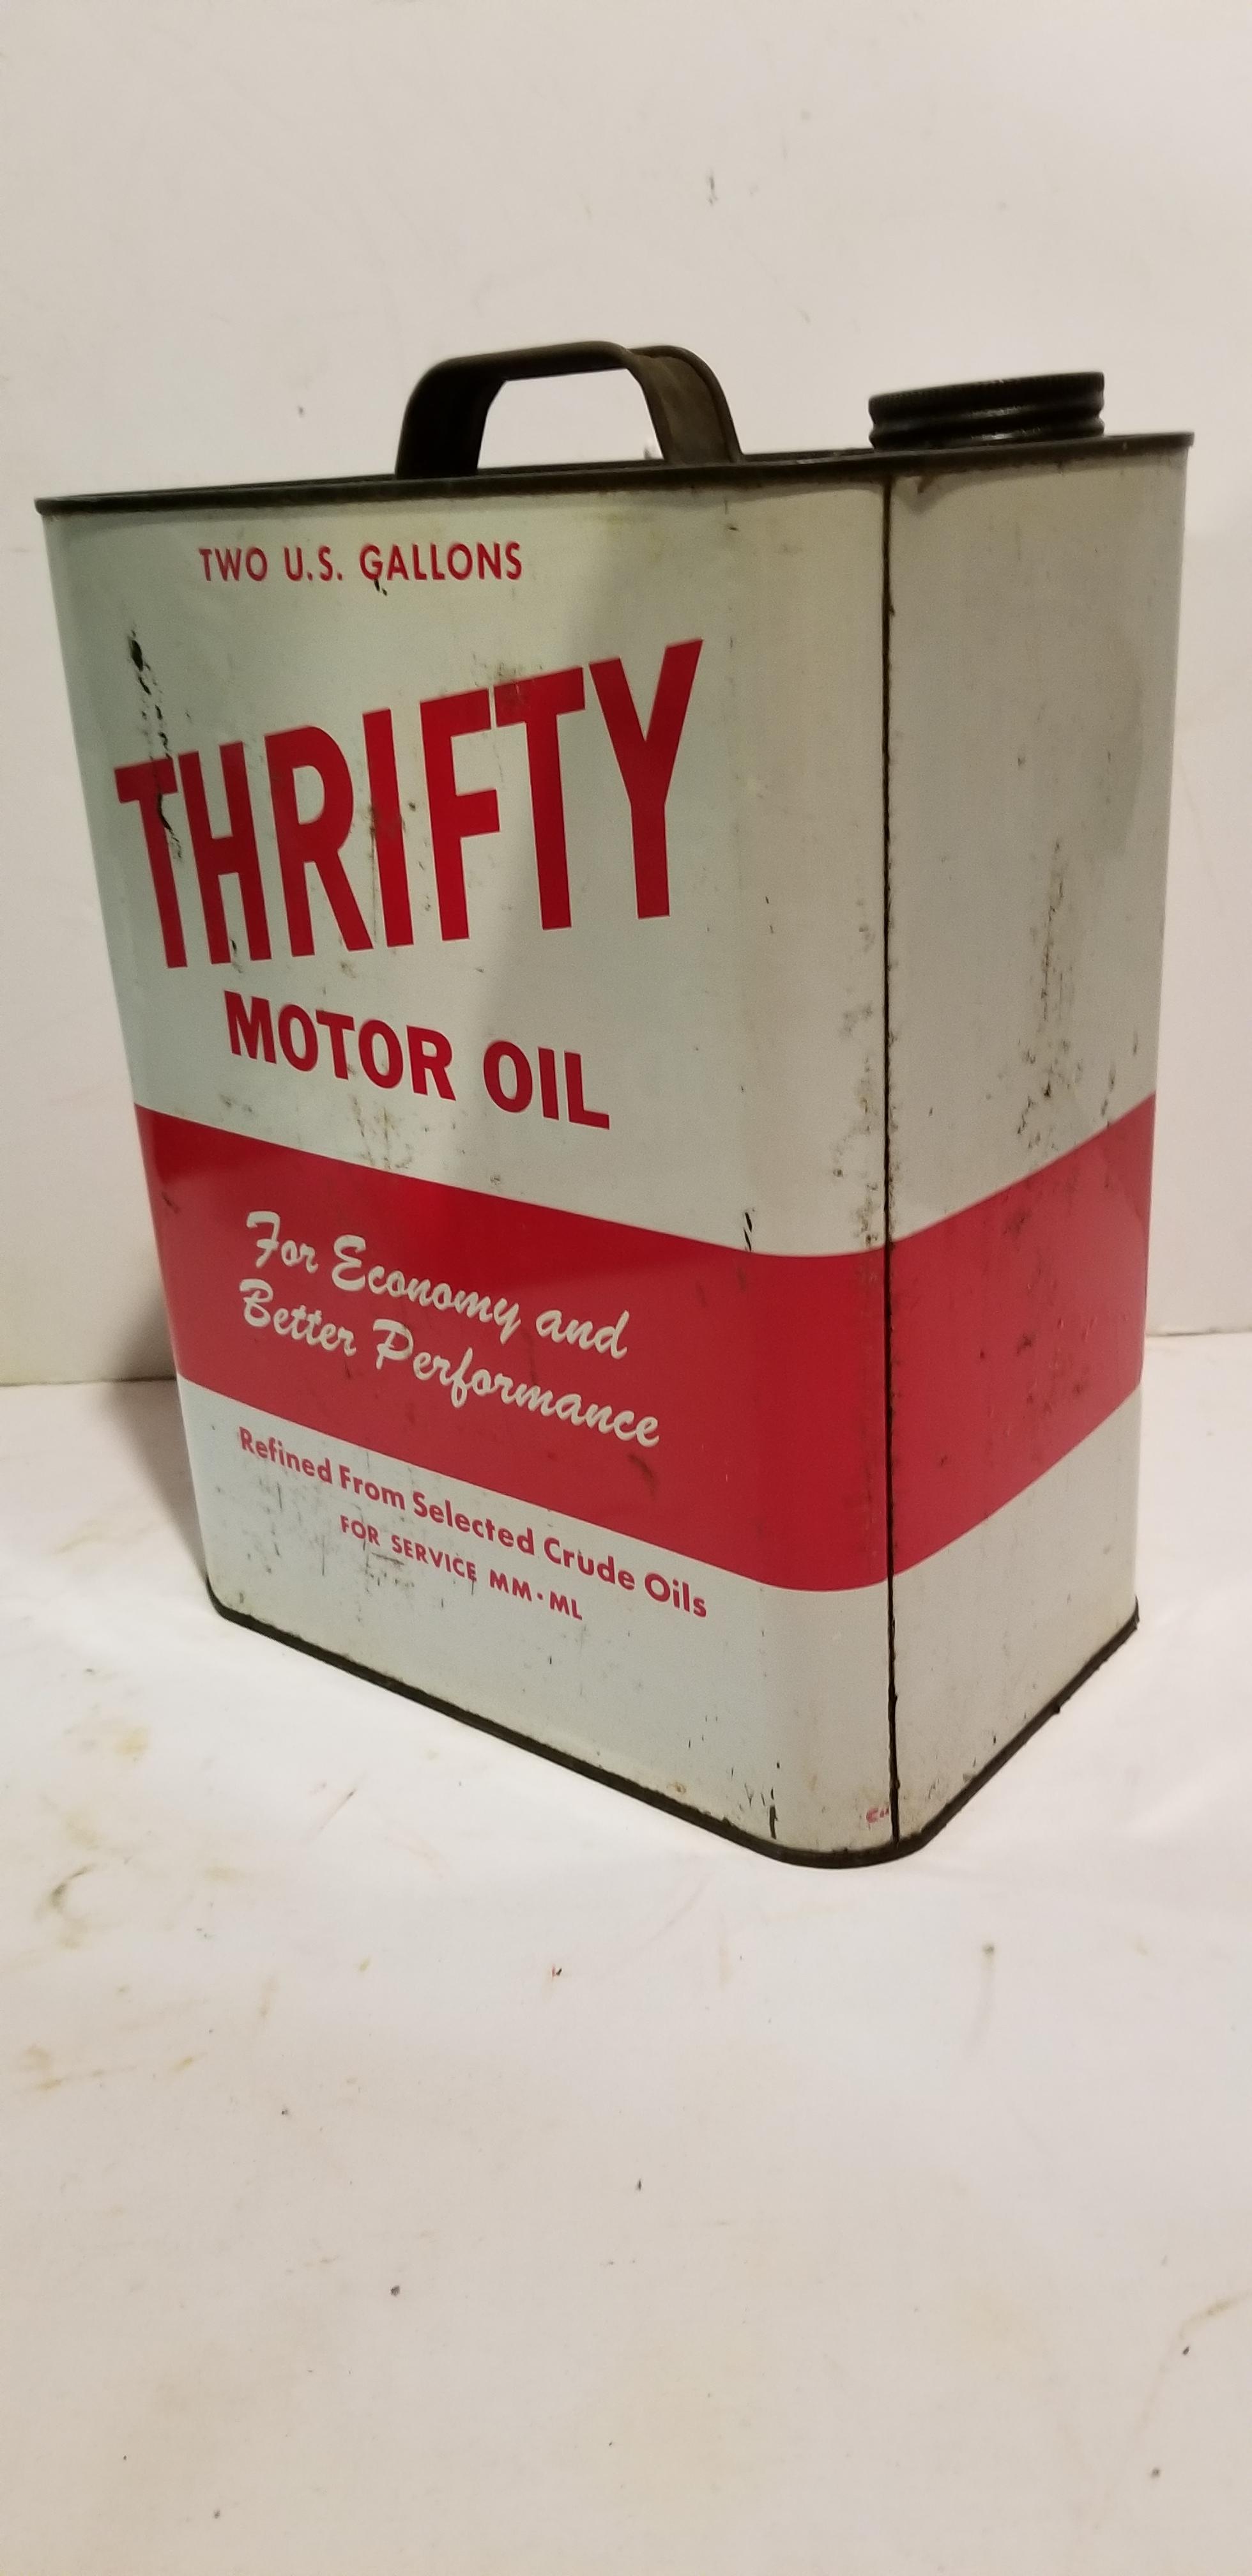 2 GALLON THRIFTY MOTOR OIL CAN